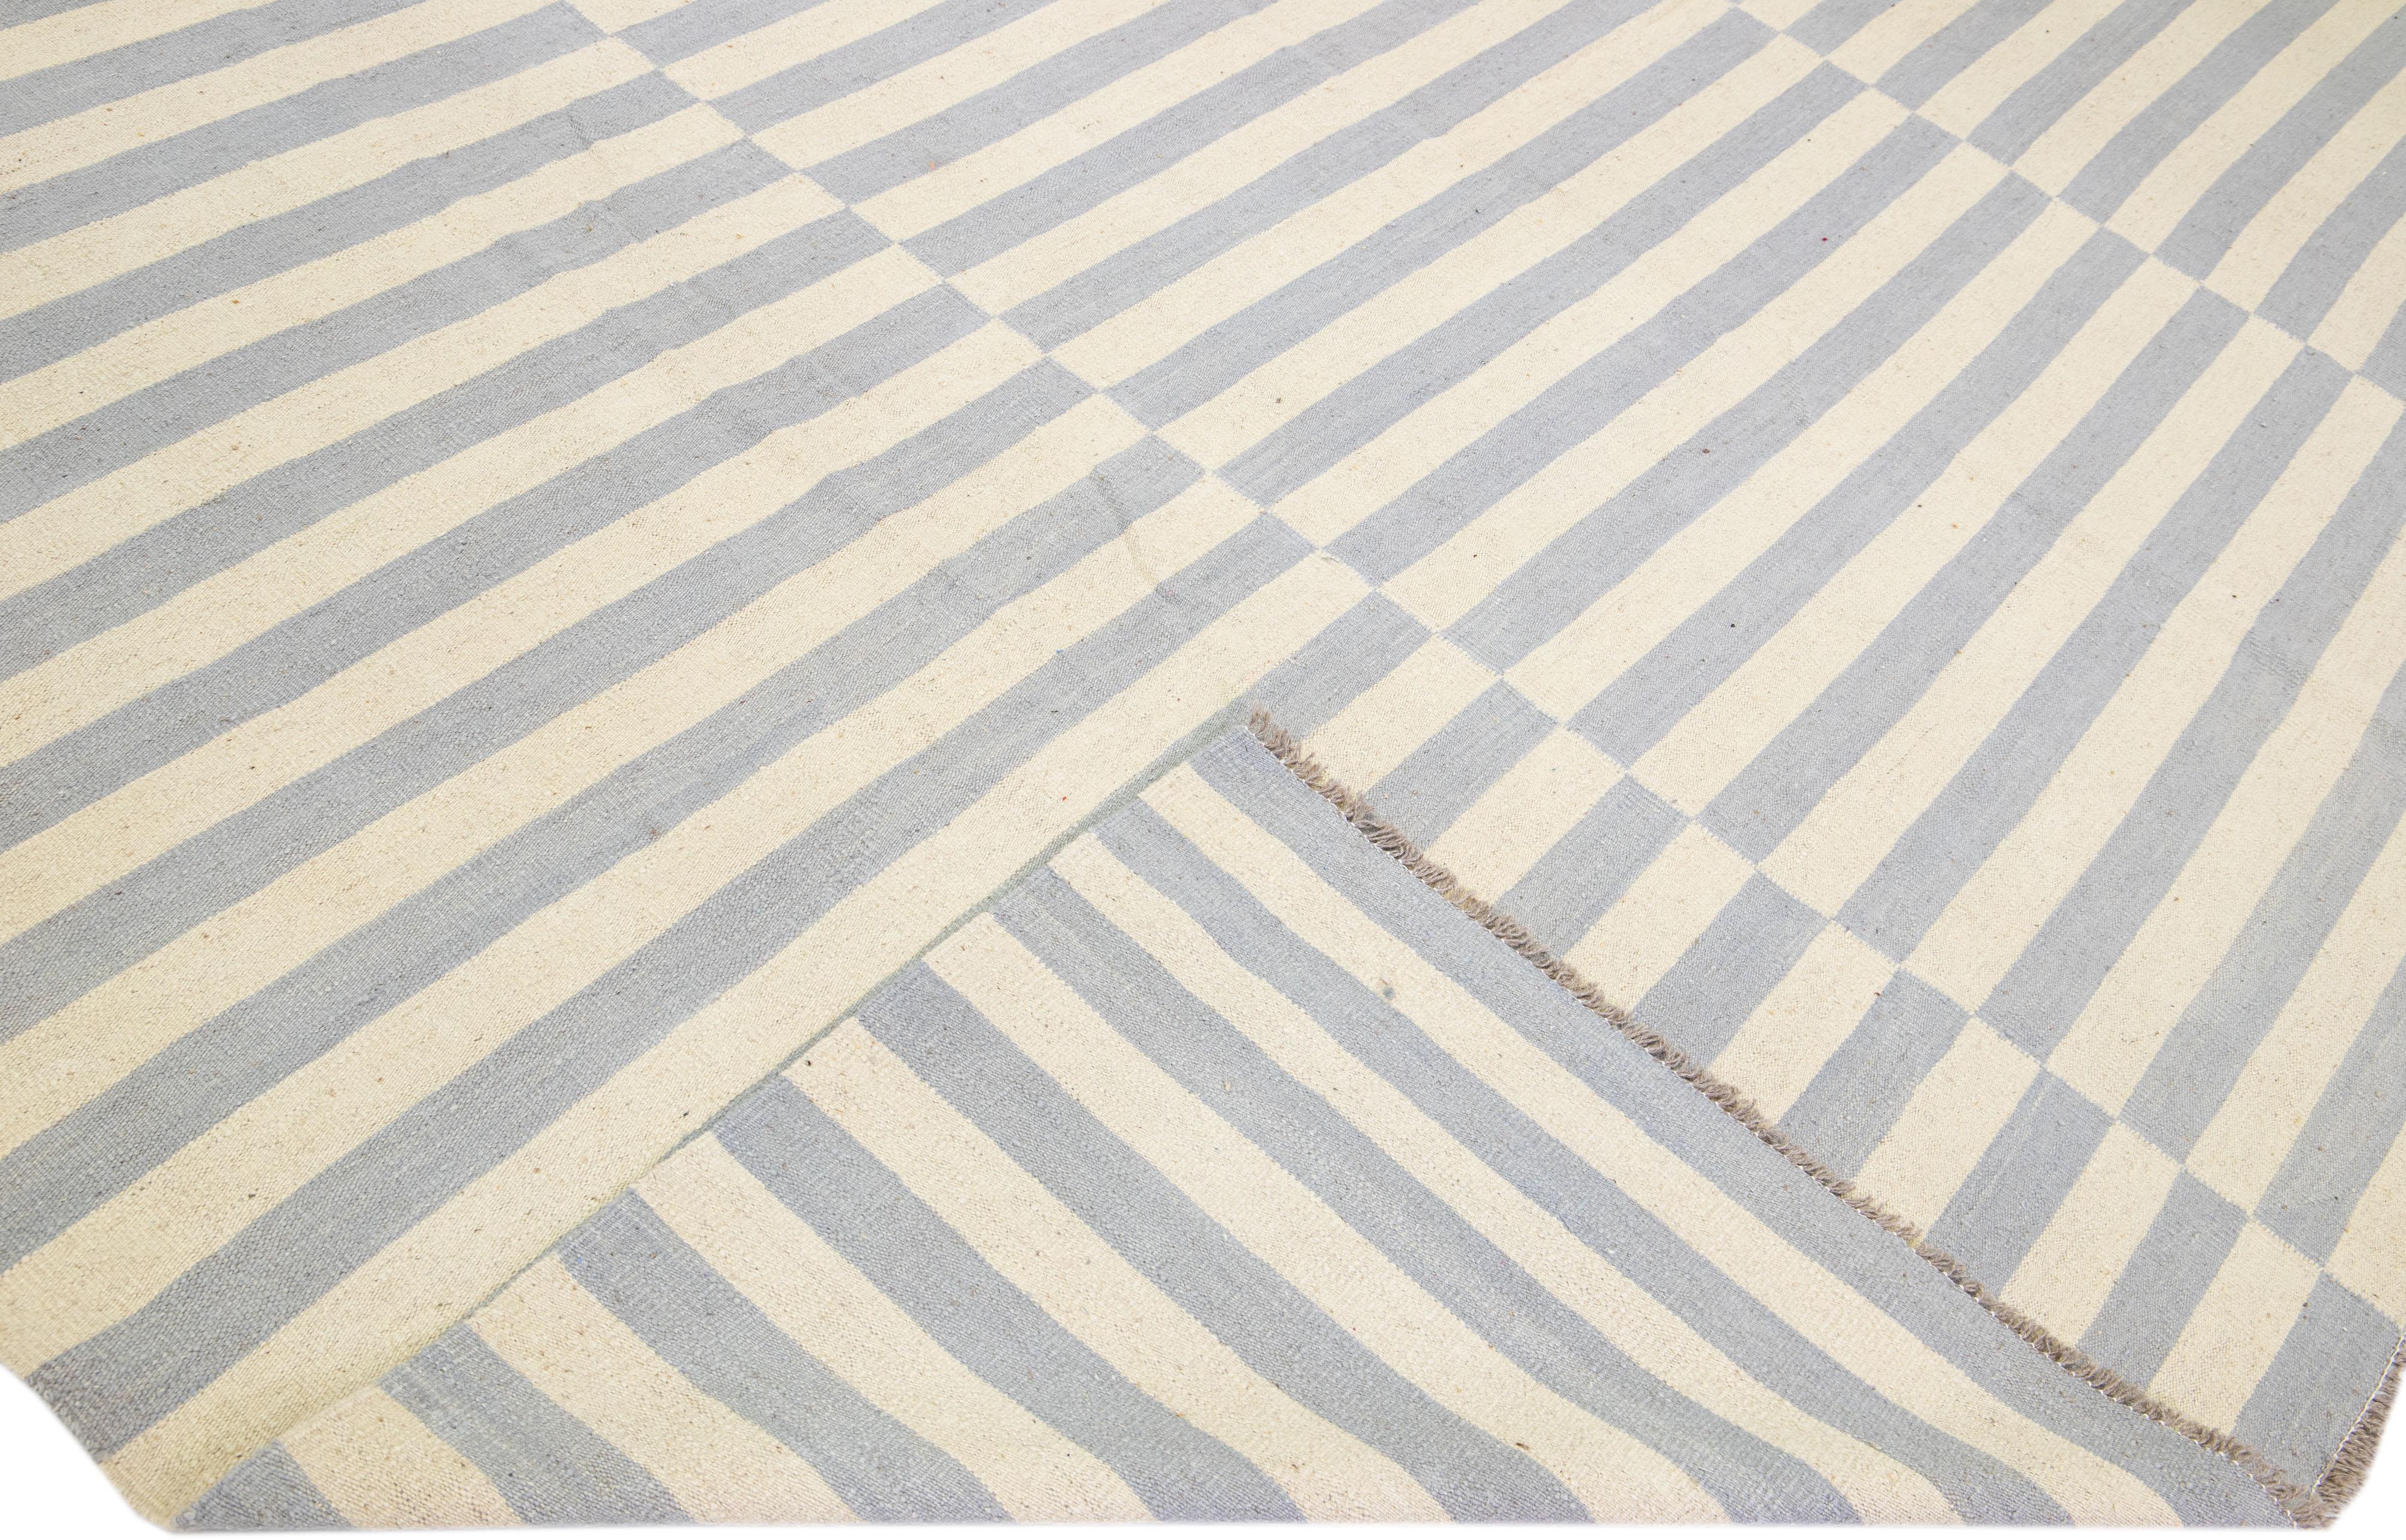 Beautiful Modern flat-weave Kilim handmade wool rug with a beige color field. This Kilim rug has gray accents in a gorgeous all-over stripe design.

This rug measures: 12'5